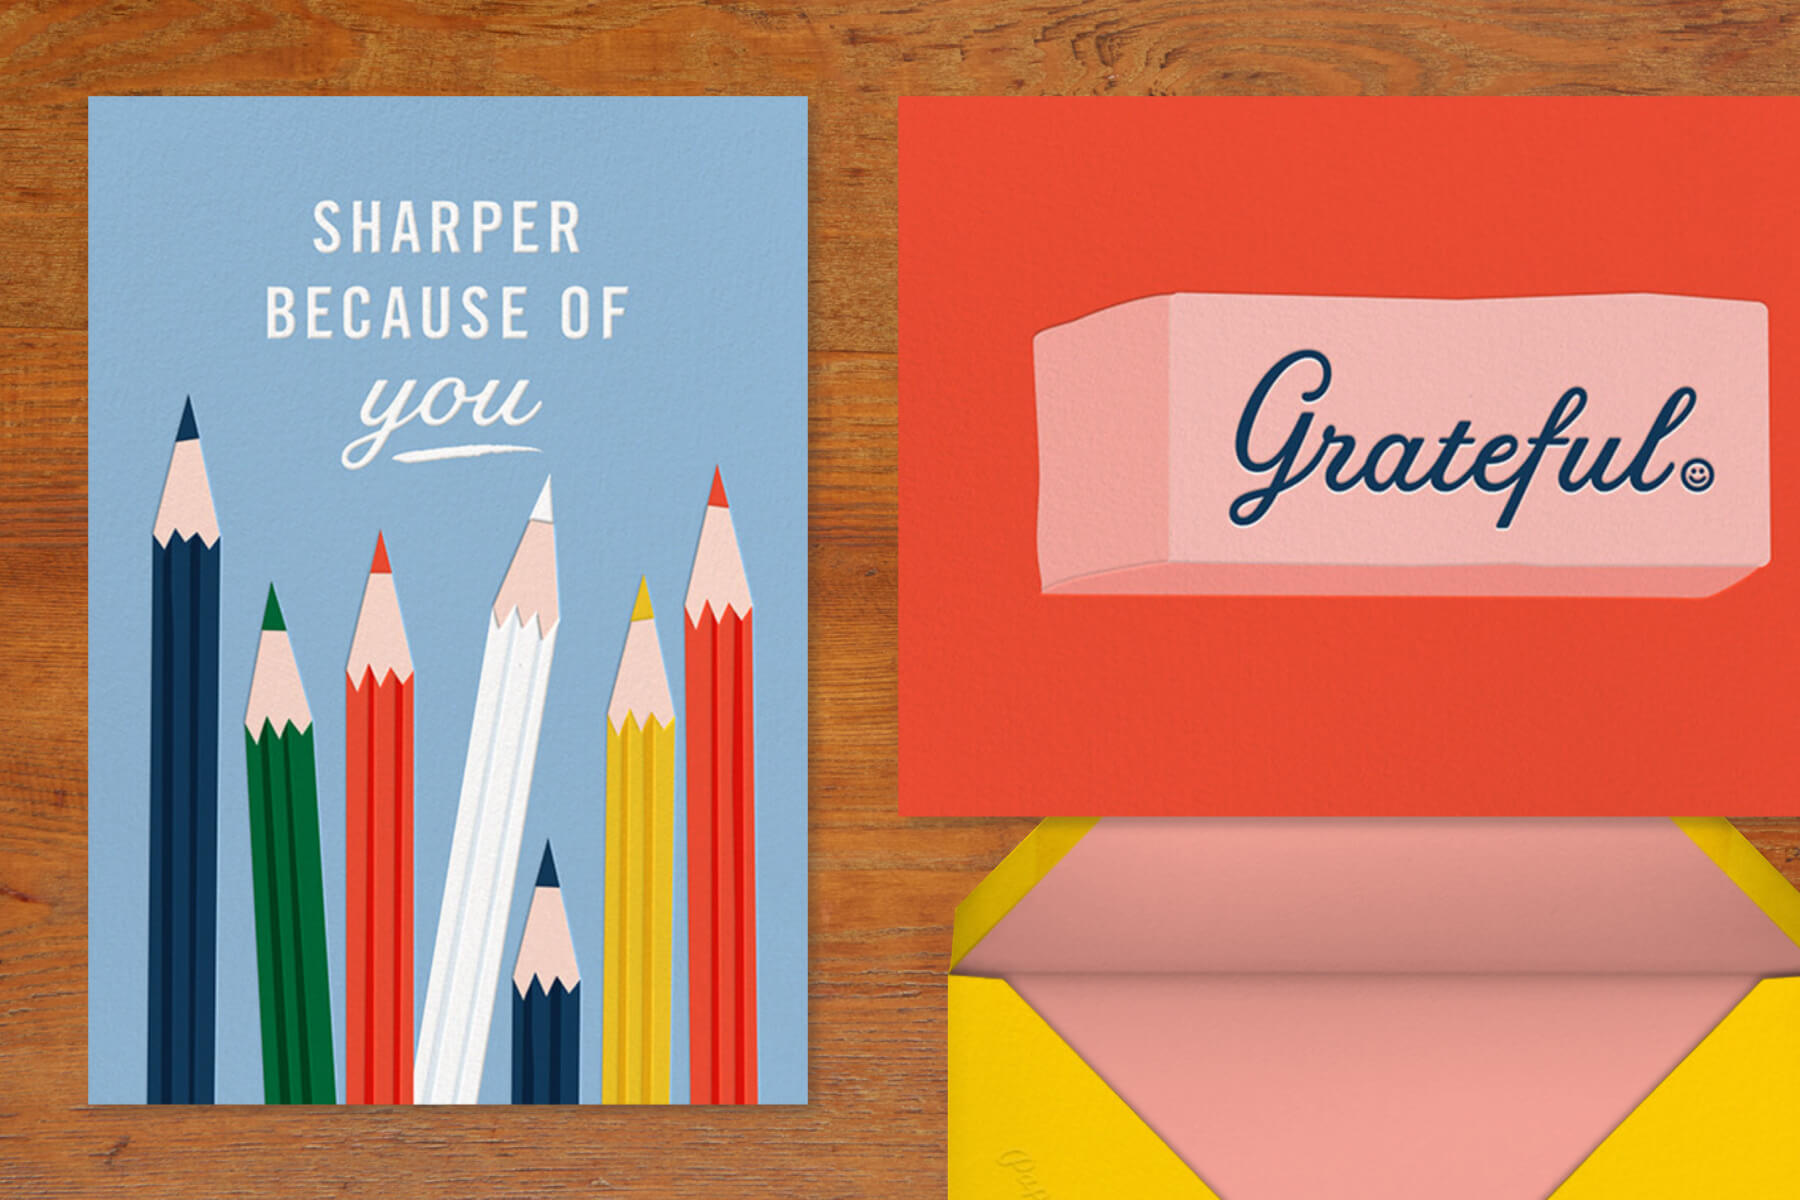 Teacher Appreciation Quotes and Messages